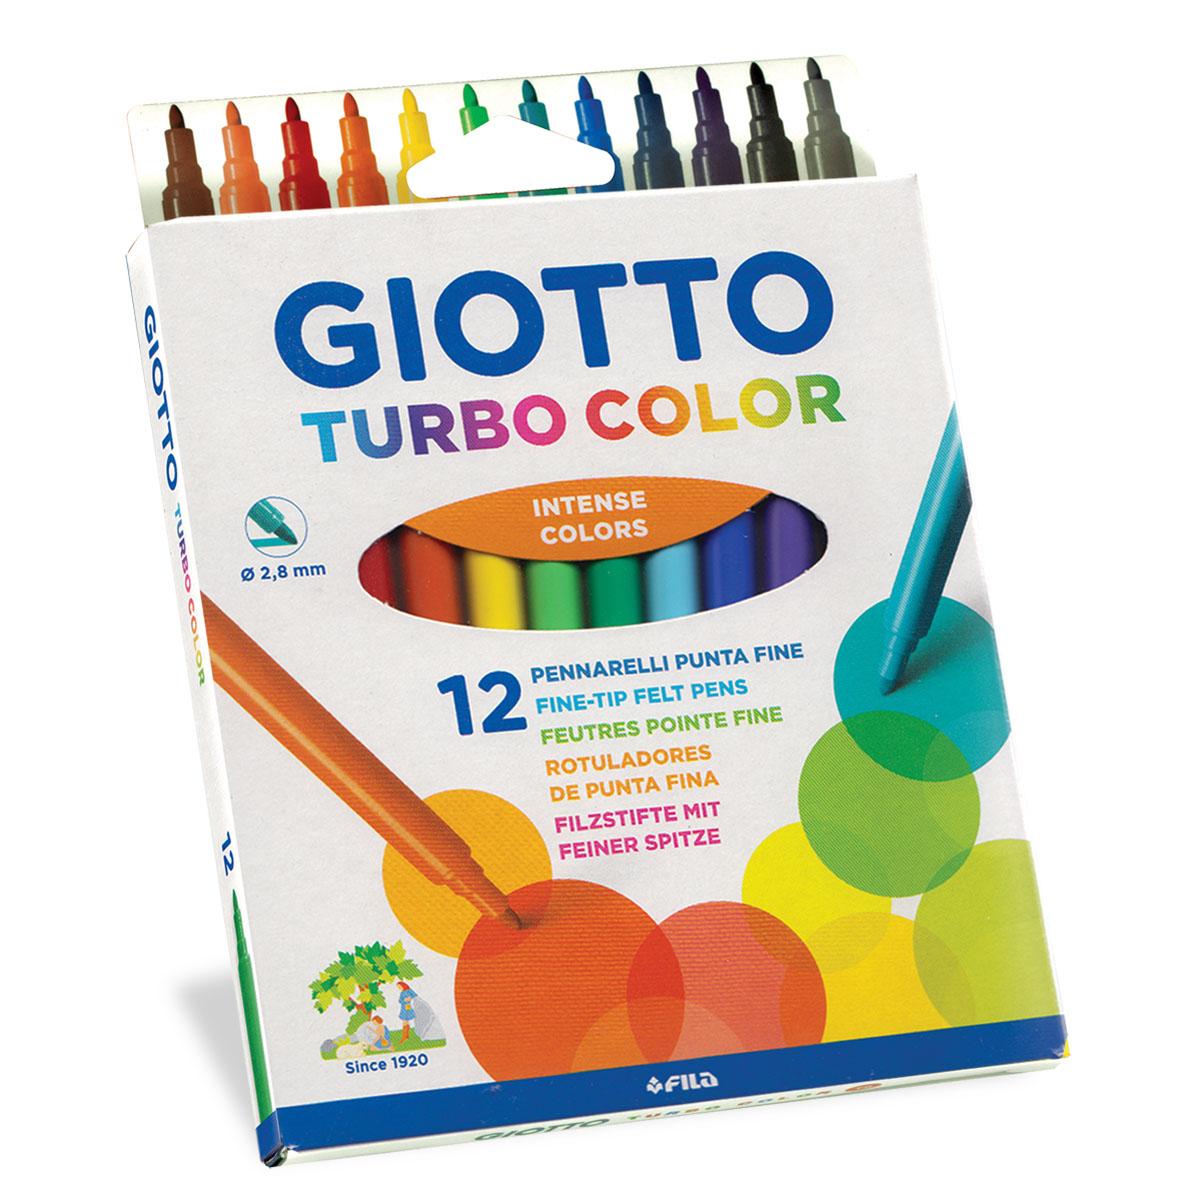 GIOTTO Flomaster 12/1 Turbo color blister 071400